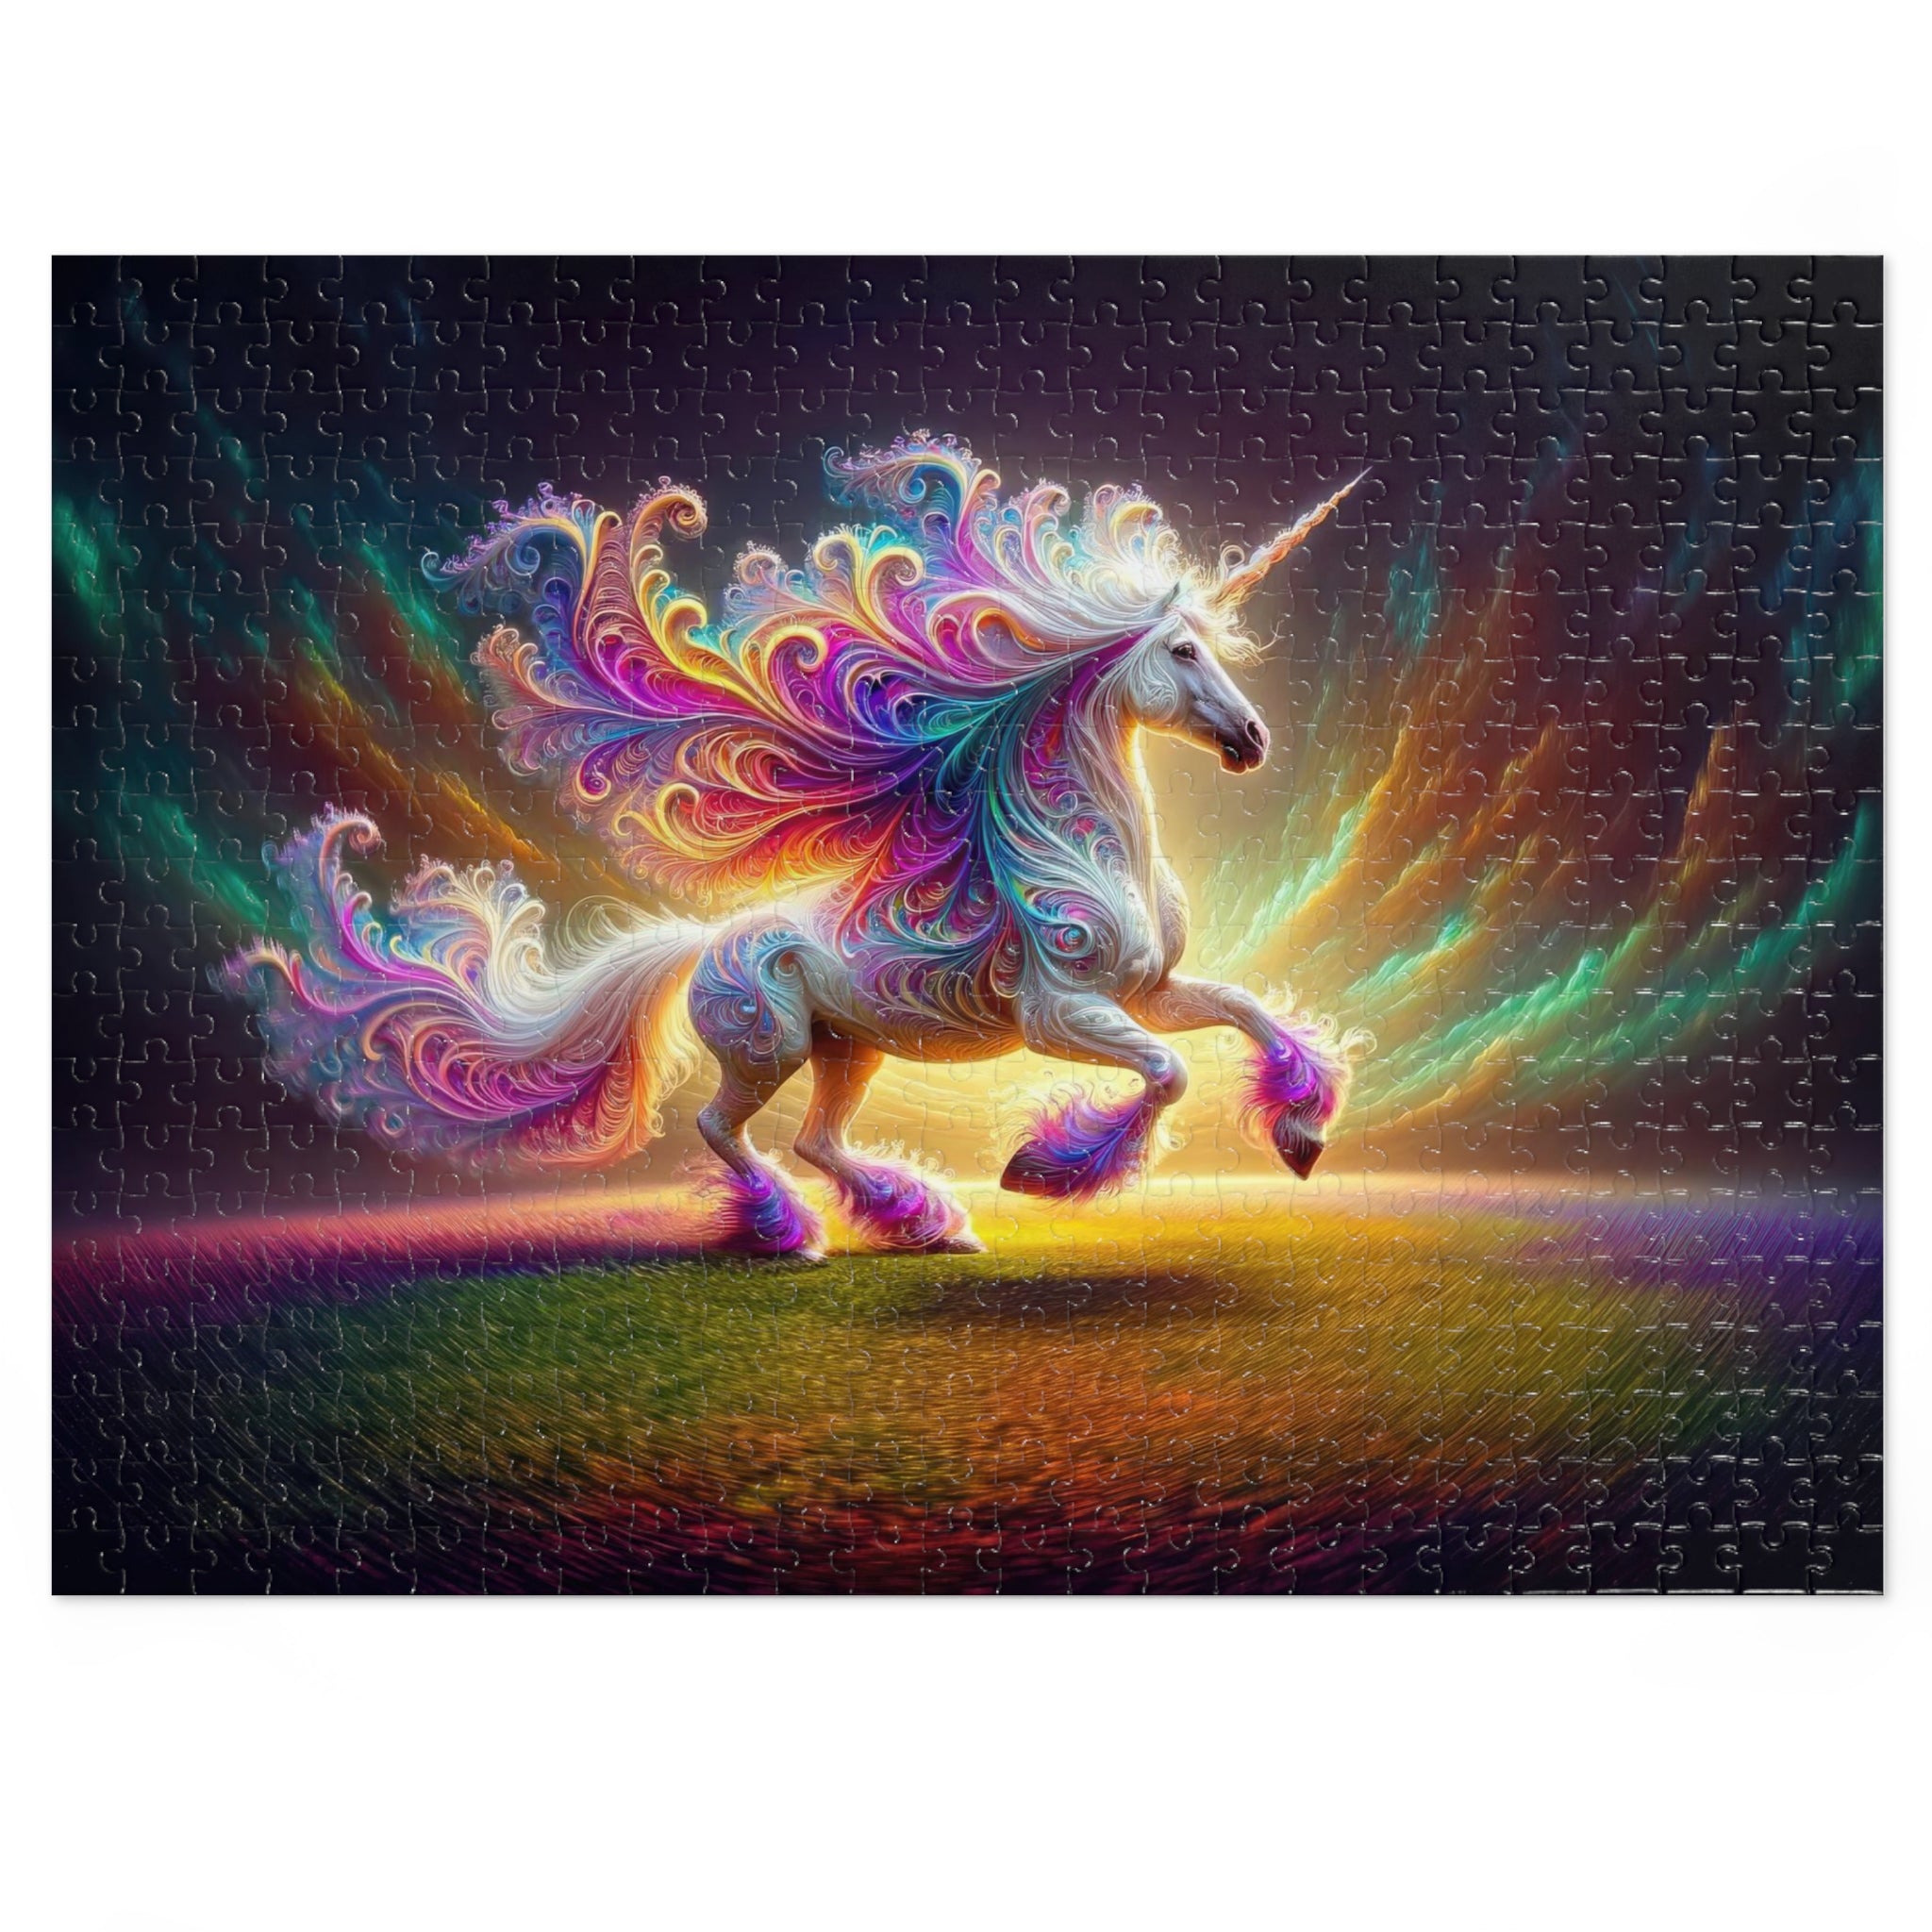 The Unicorn's Realm Jigsaw Puzzle